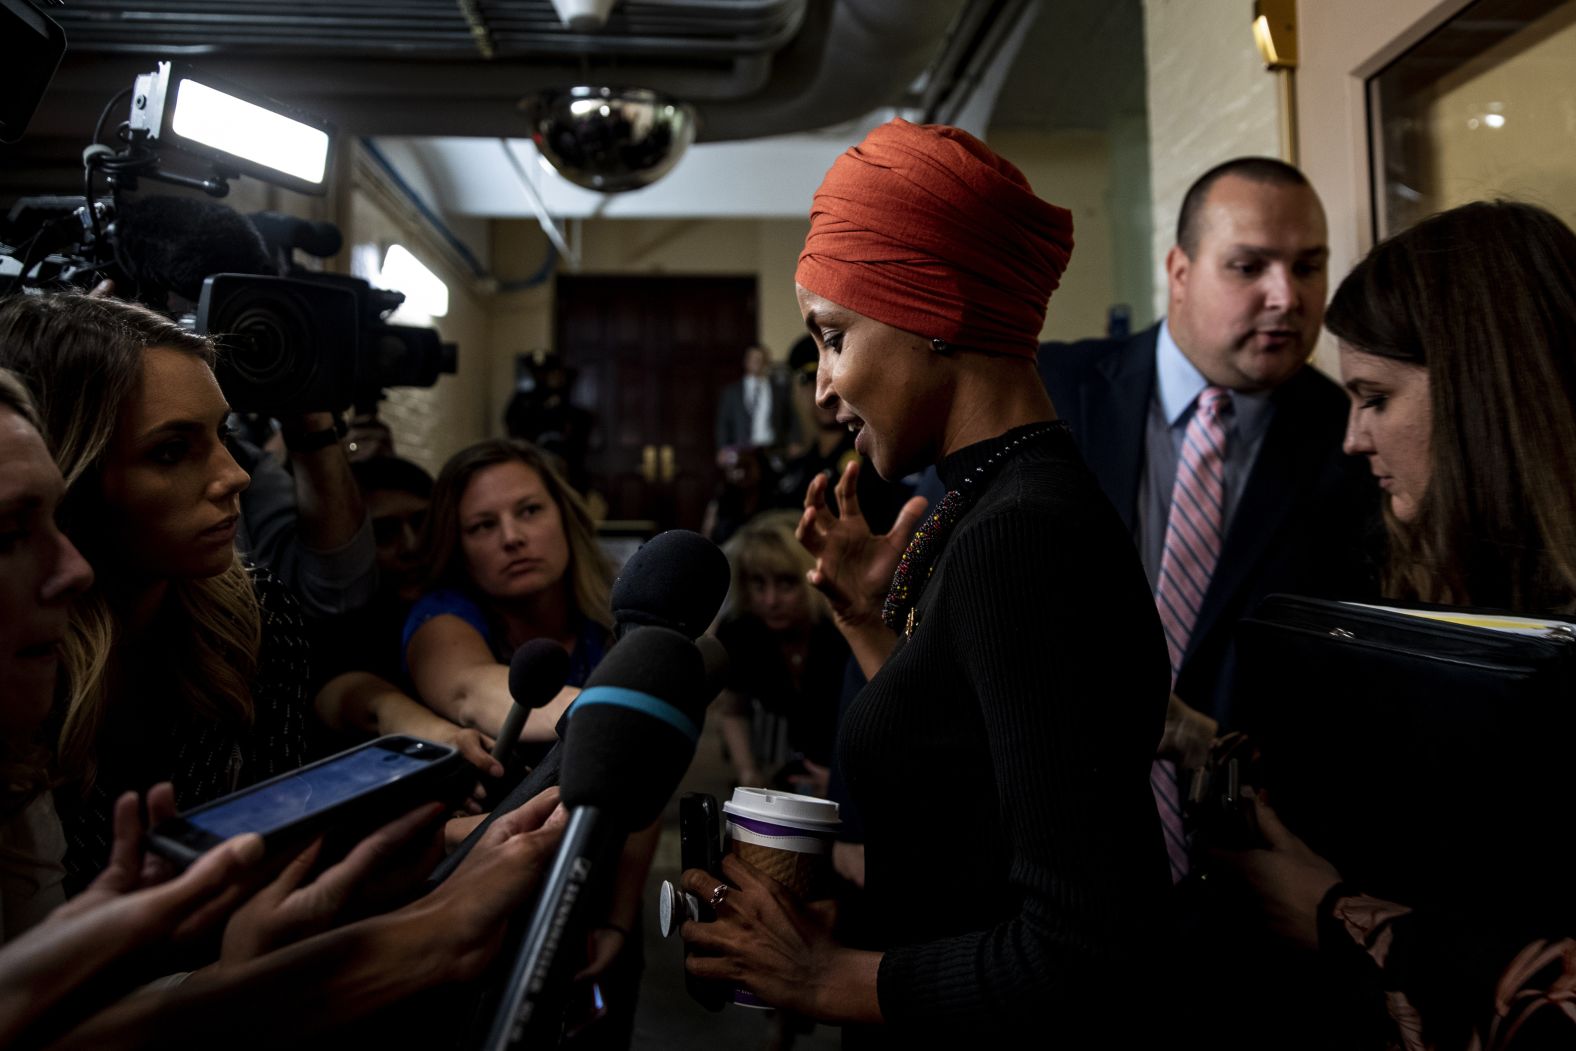 US Rep. Ilhan Omar speaks to reporters on Capitol Hill on September 24. The Democrat from Minnesota <a href="index.php?page=&url=https%3A%2F%2Fwww.cnn.com%2Fpolitics%2Flive-news%2Ftrump-ukraine-09-24-2019%2Fh_a99a0c64ec59e8b38c3f43f806e94f32" target="_blank">told CNN</a> that Trump's phone call with Ukraine's president was "the straw that broke the camel's back" for the House deciding to move forward with an impeachment inquiry.